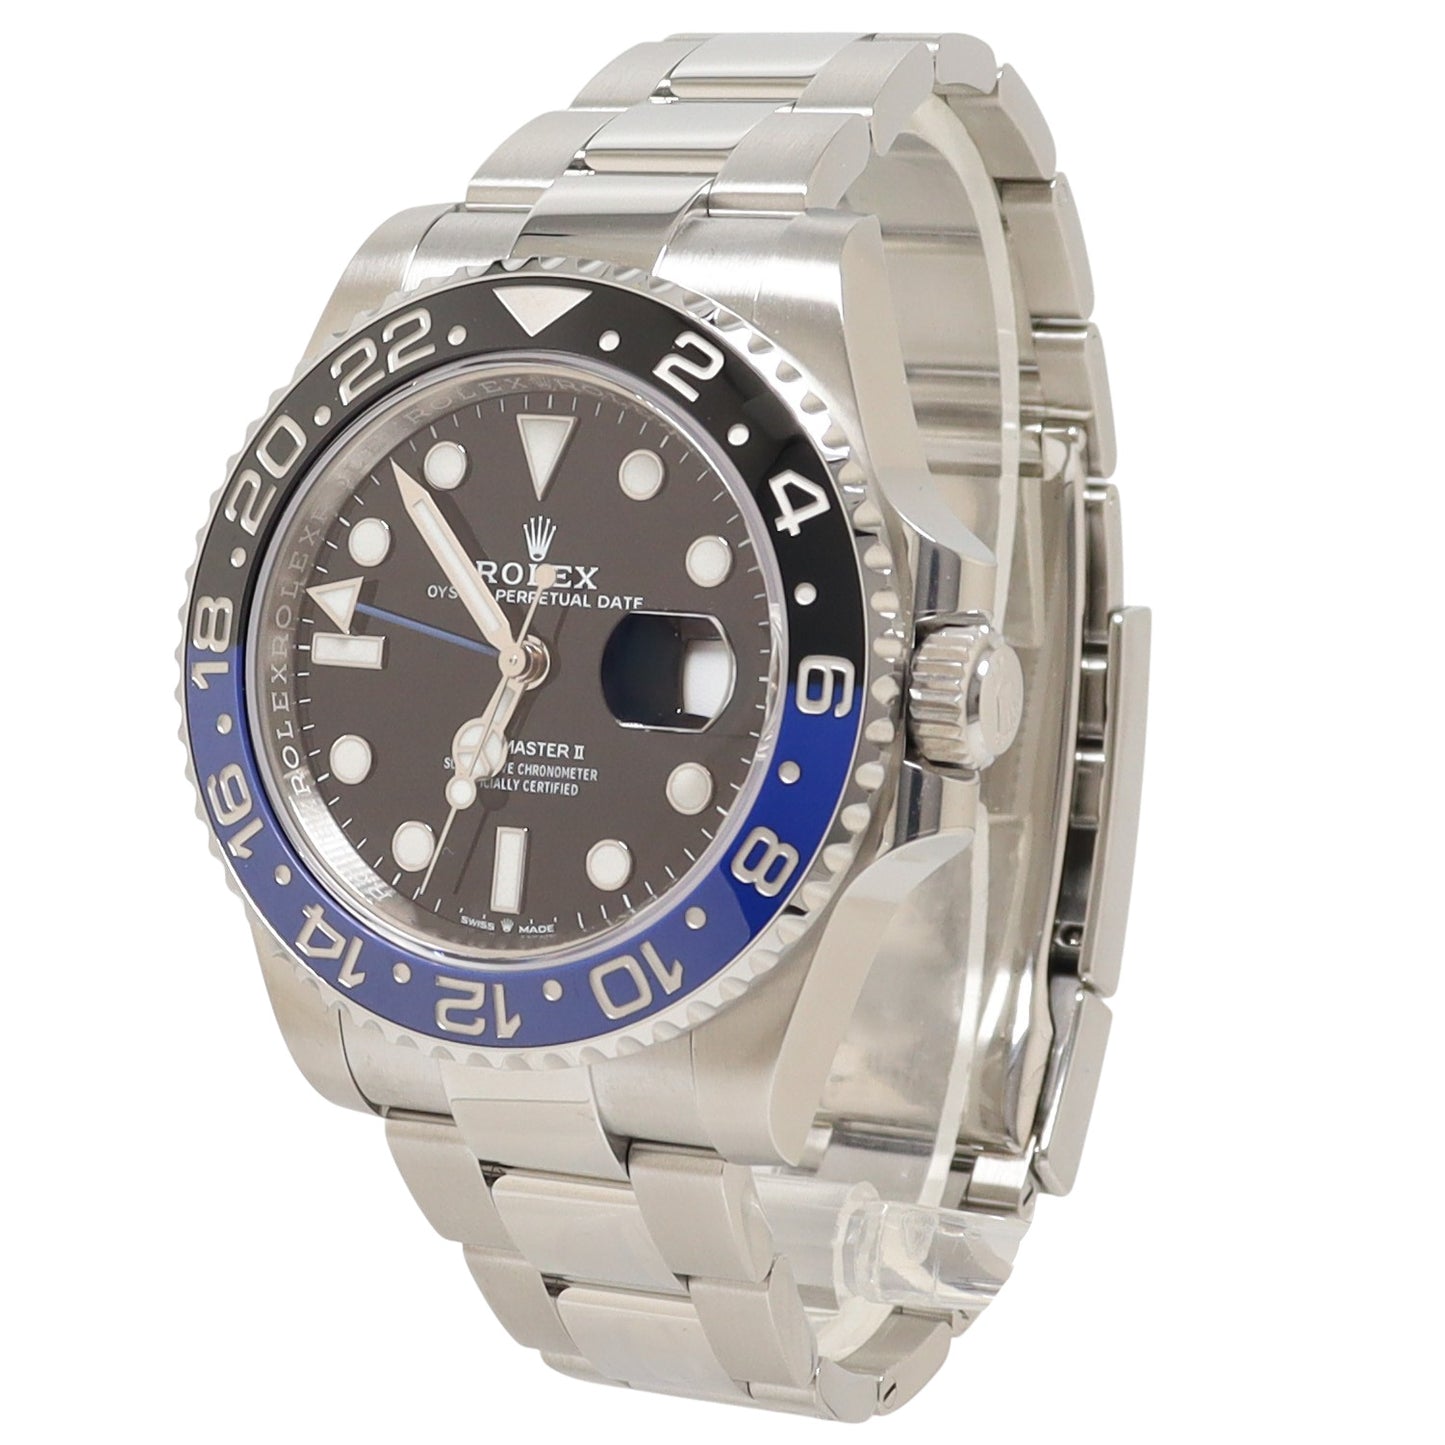 Rolex GMT Master II "Batman" Stainless Steel 40mm Black Dot Dial Watch Reference# 126710BLNR